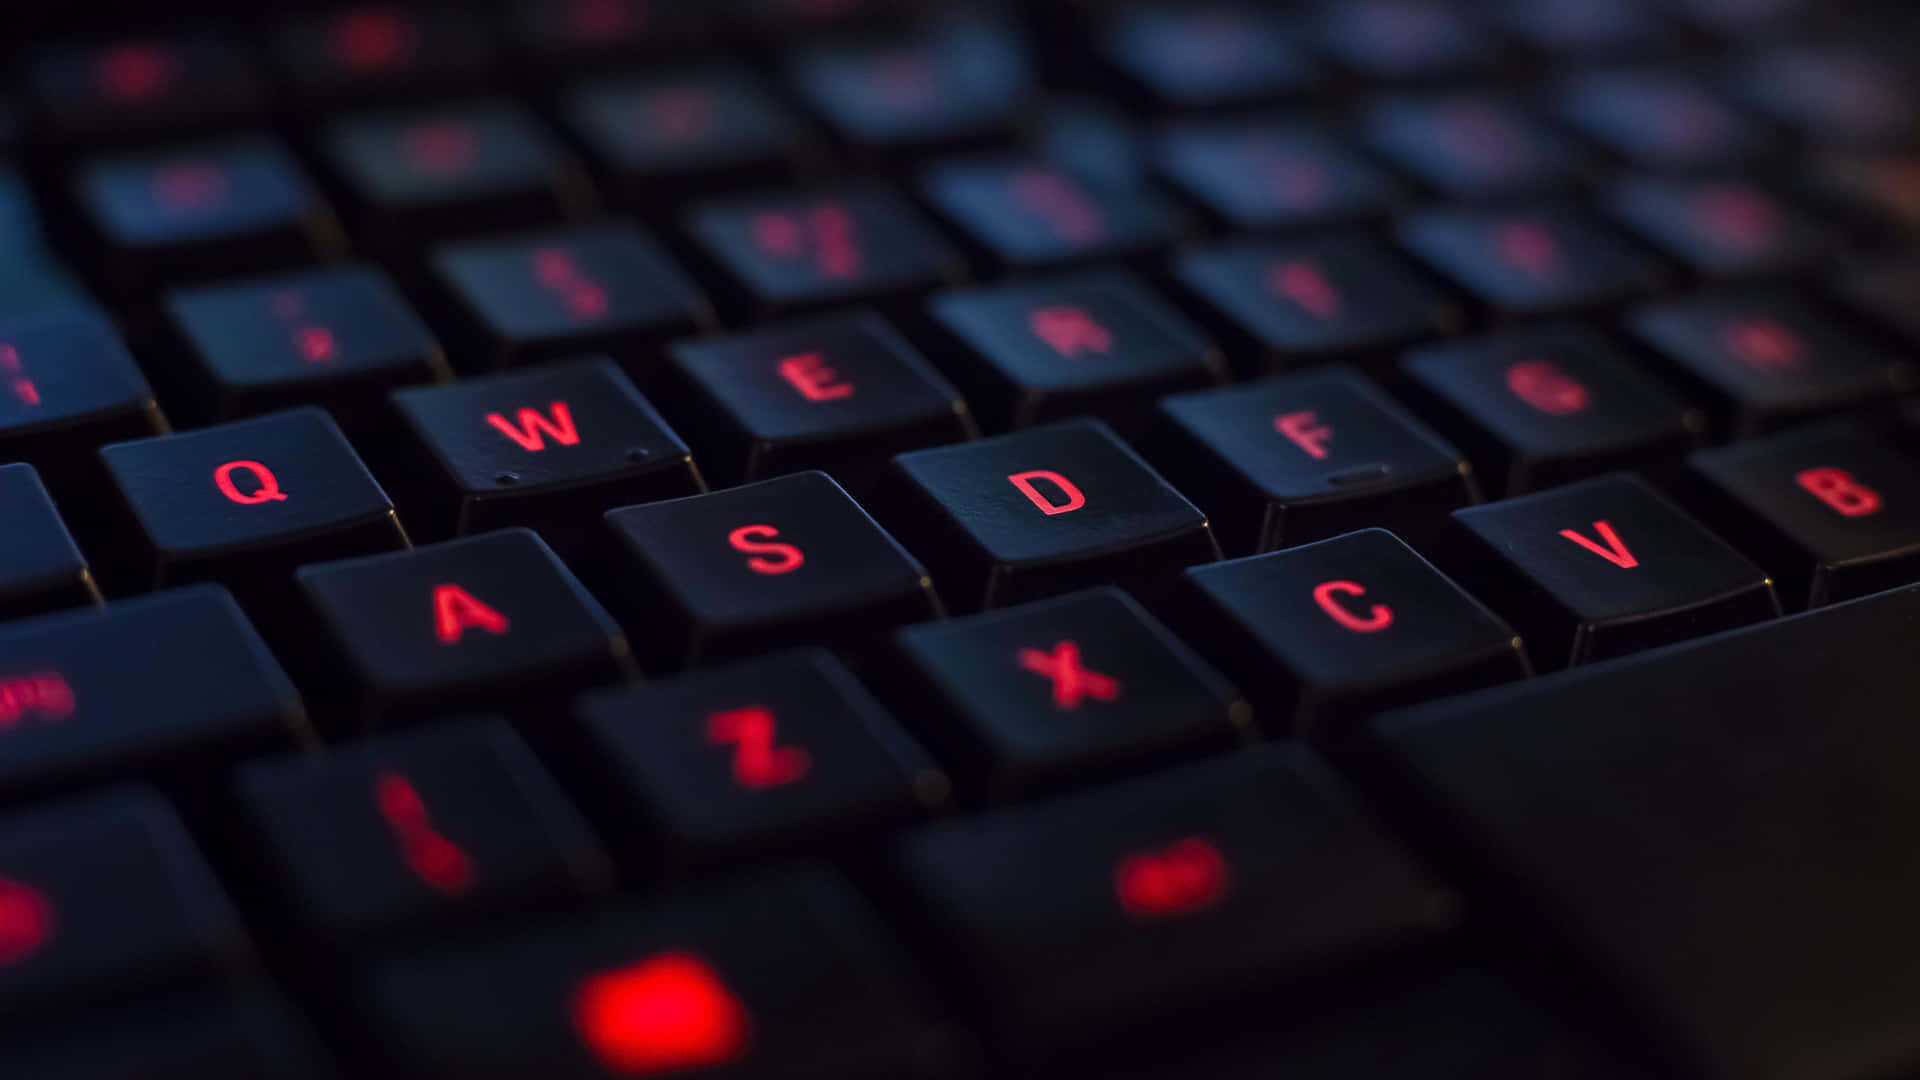 Play your favorite game with style using the best gaming keyboards Wallpaper